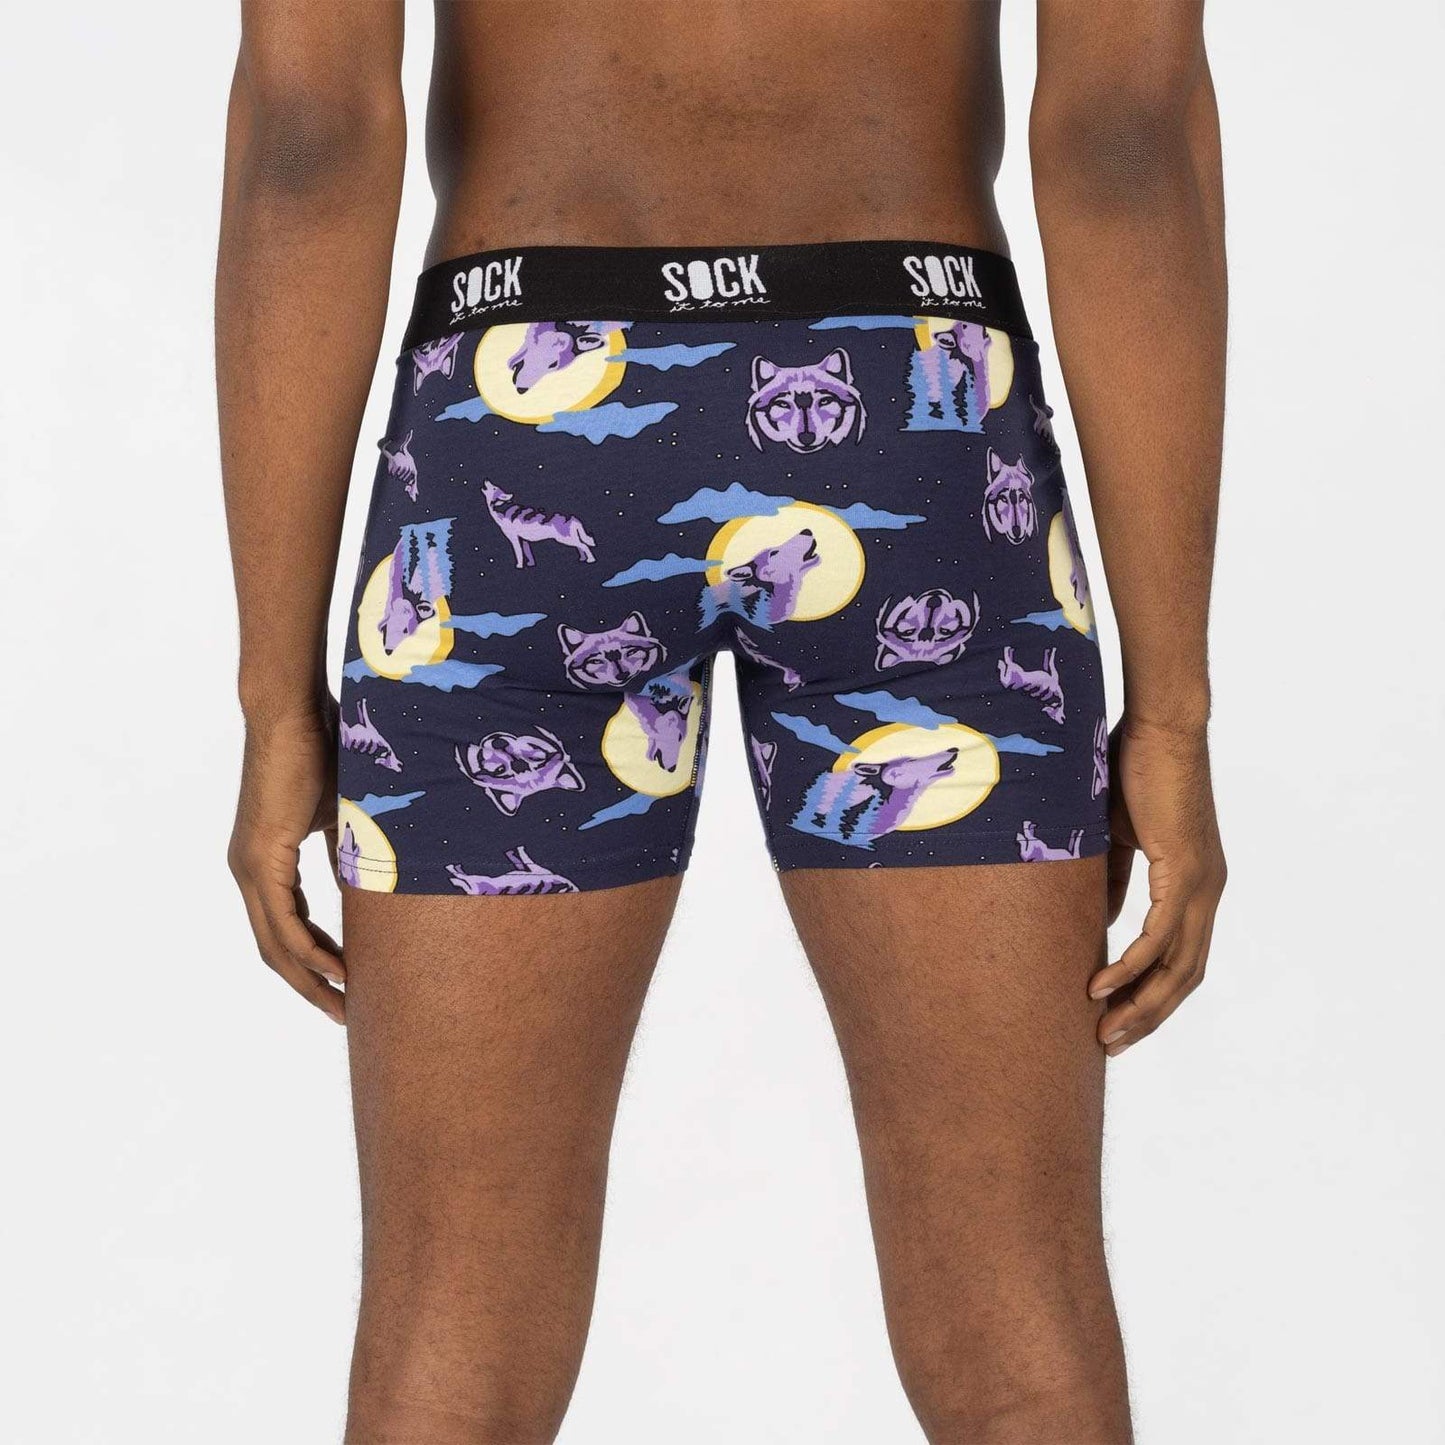 Sock it to Me 6 Wolf Moon Mens Boxers